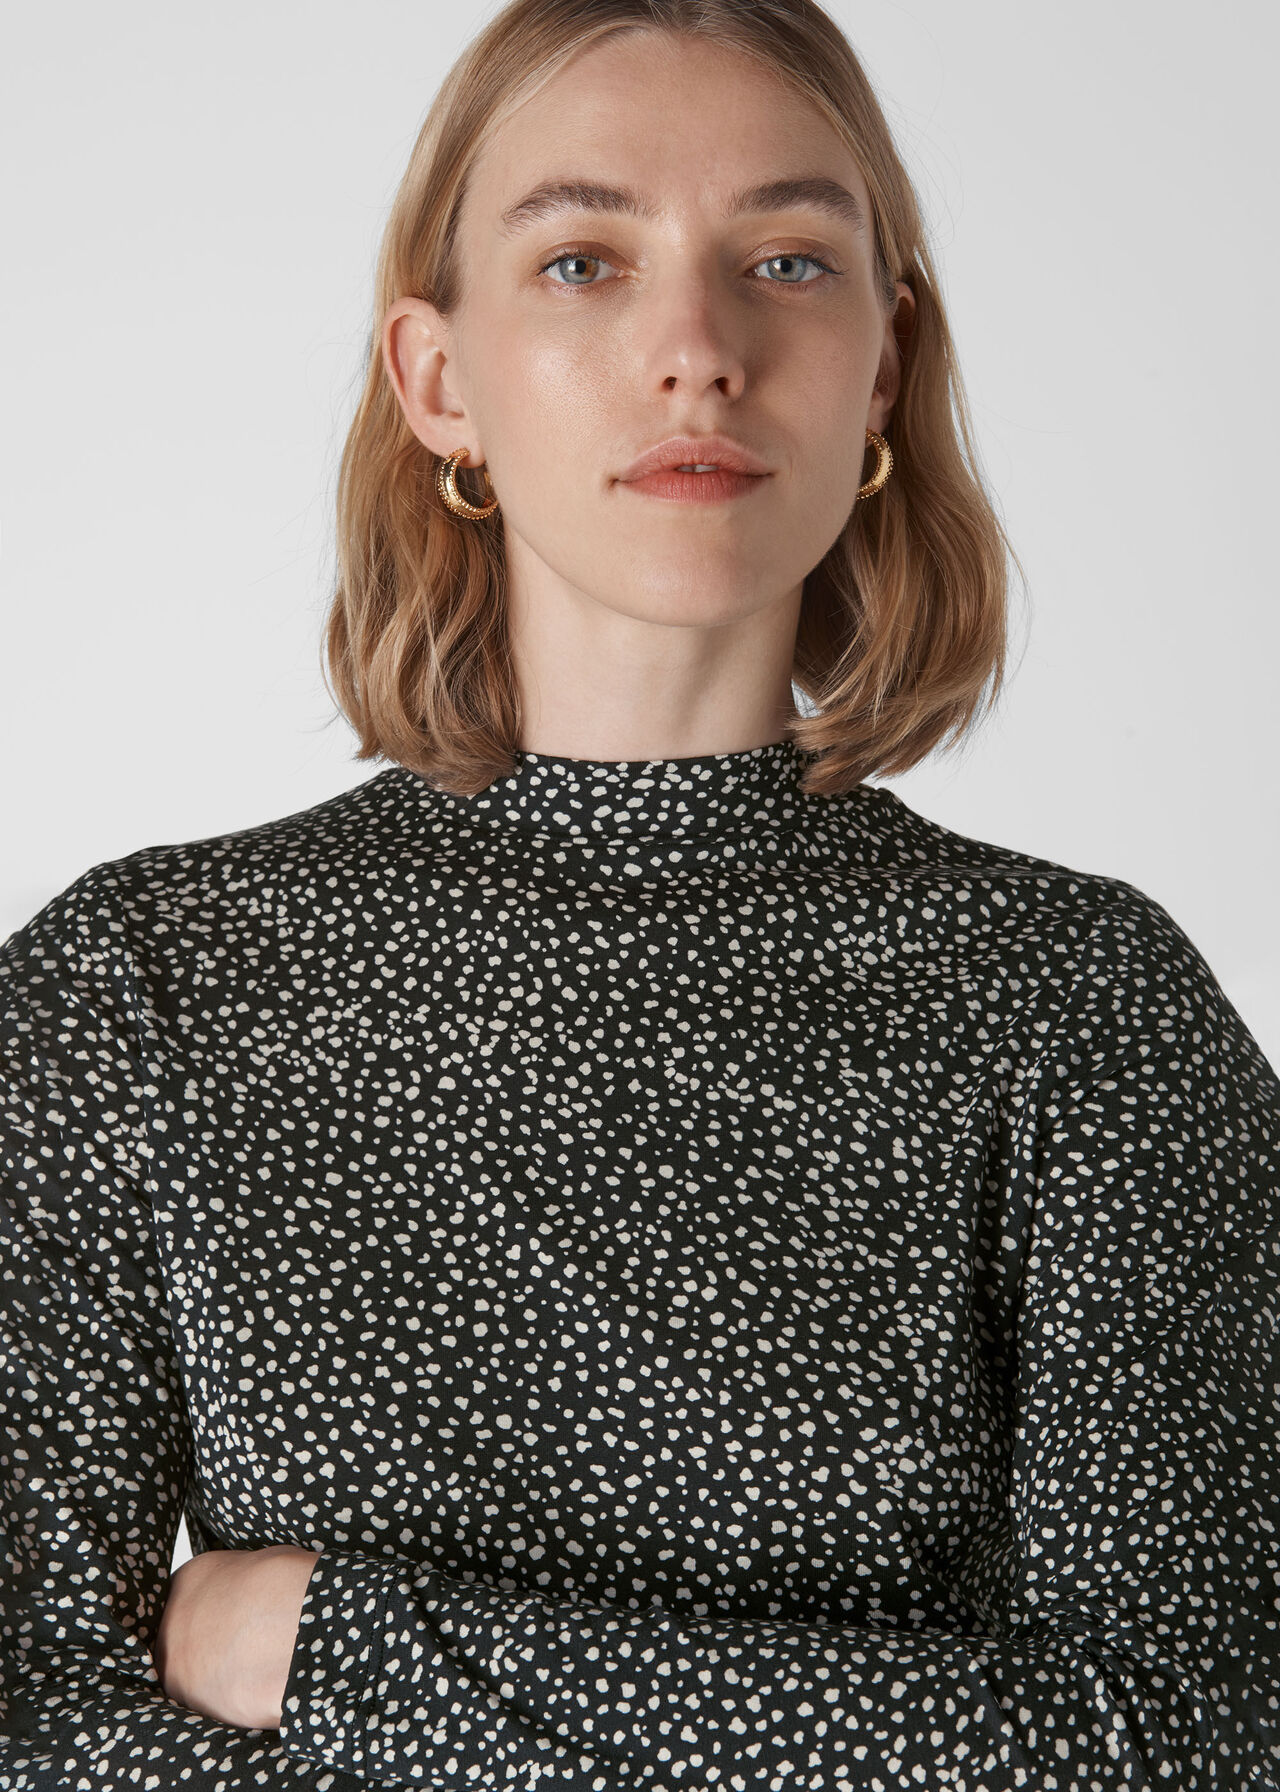 Mottled Spot Essential Top Black and White